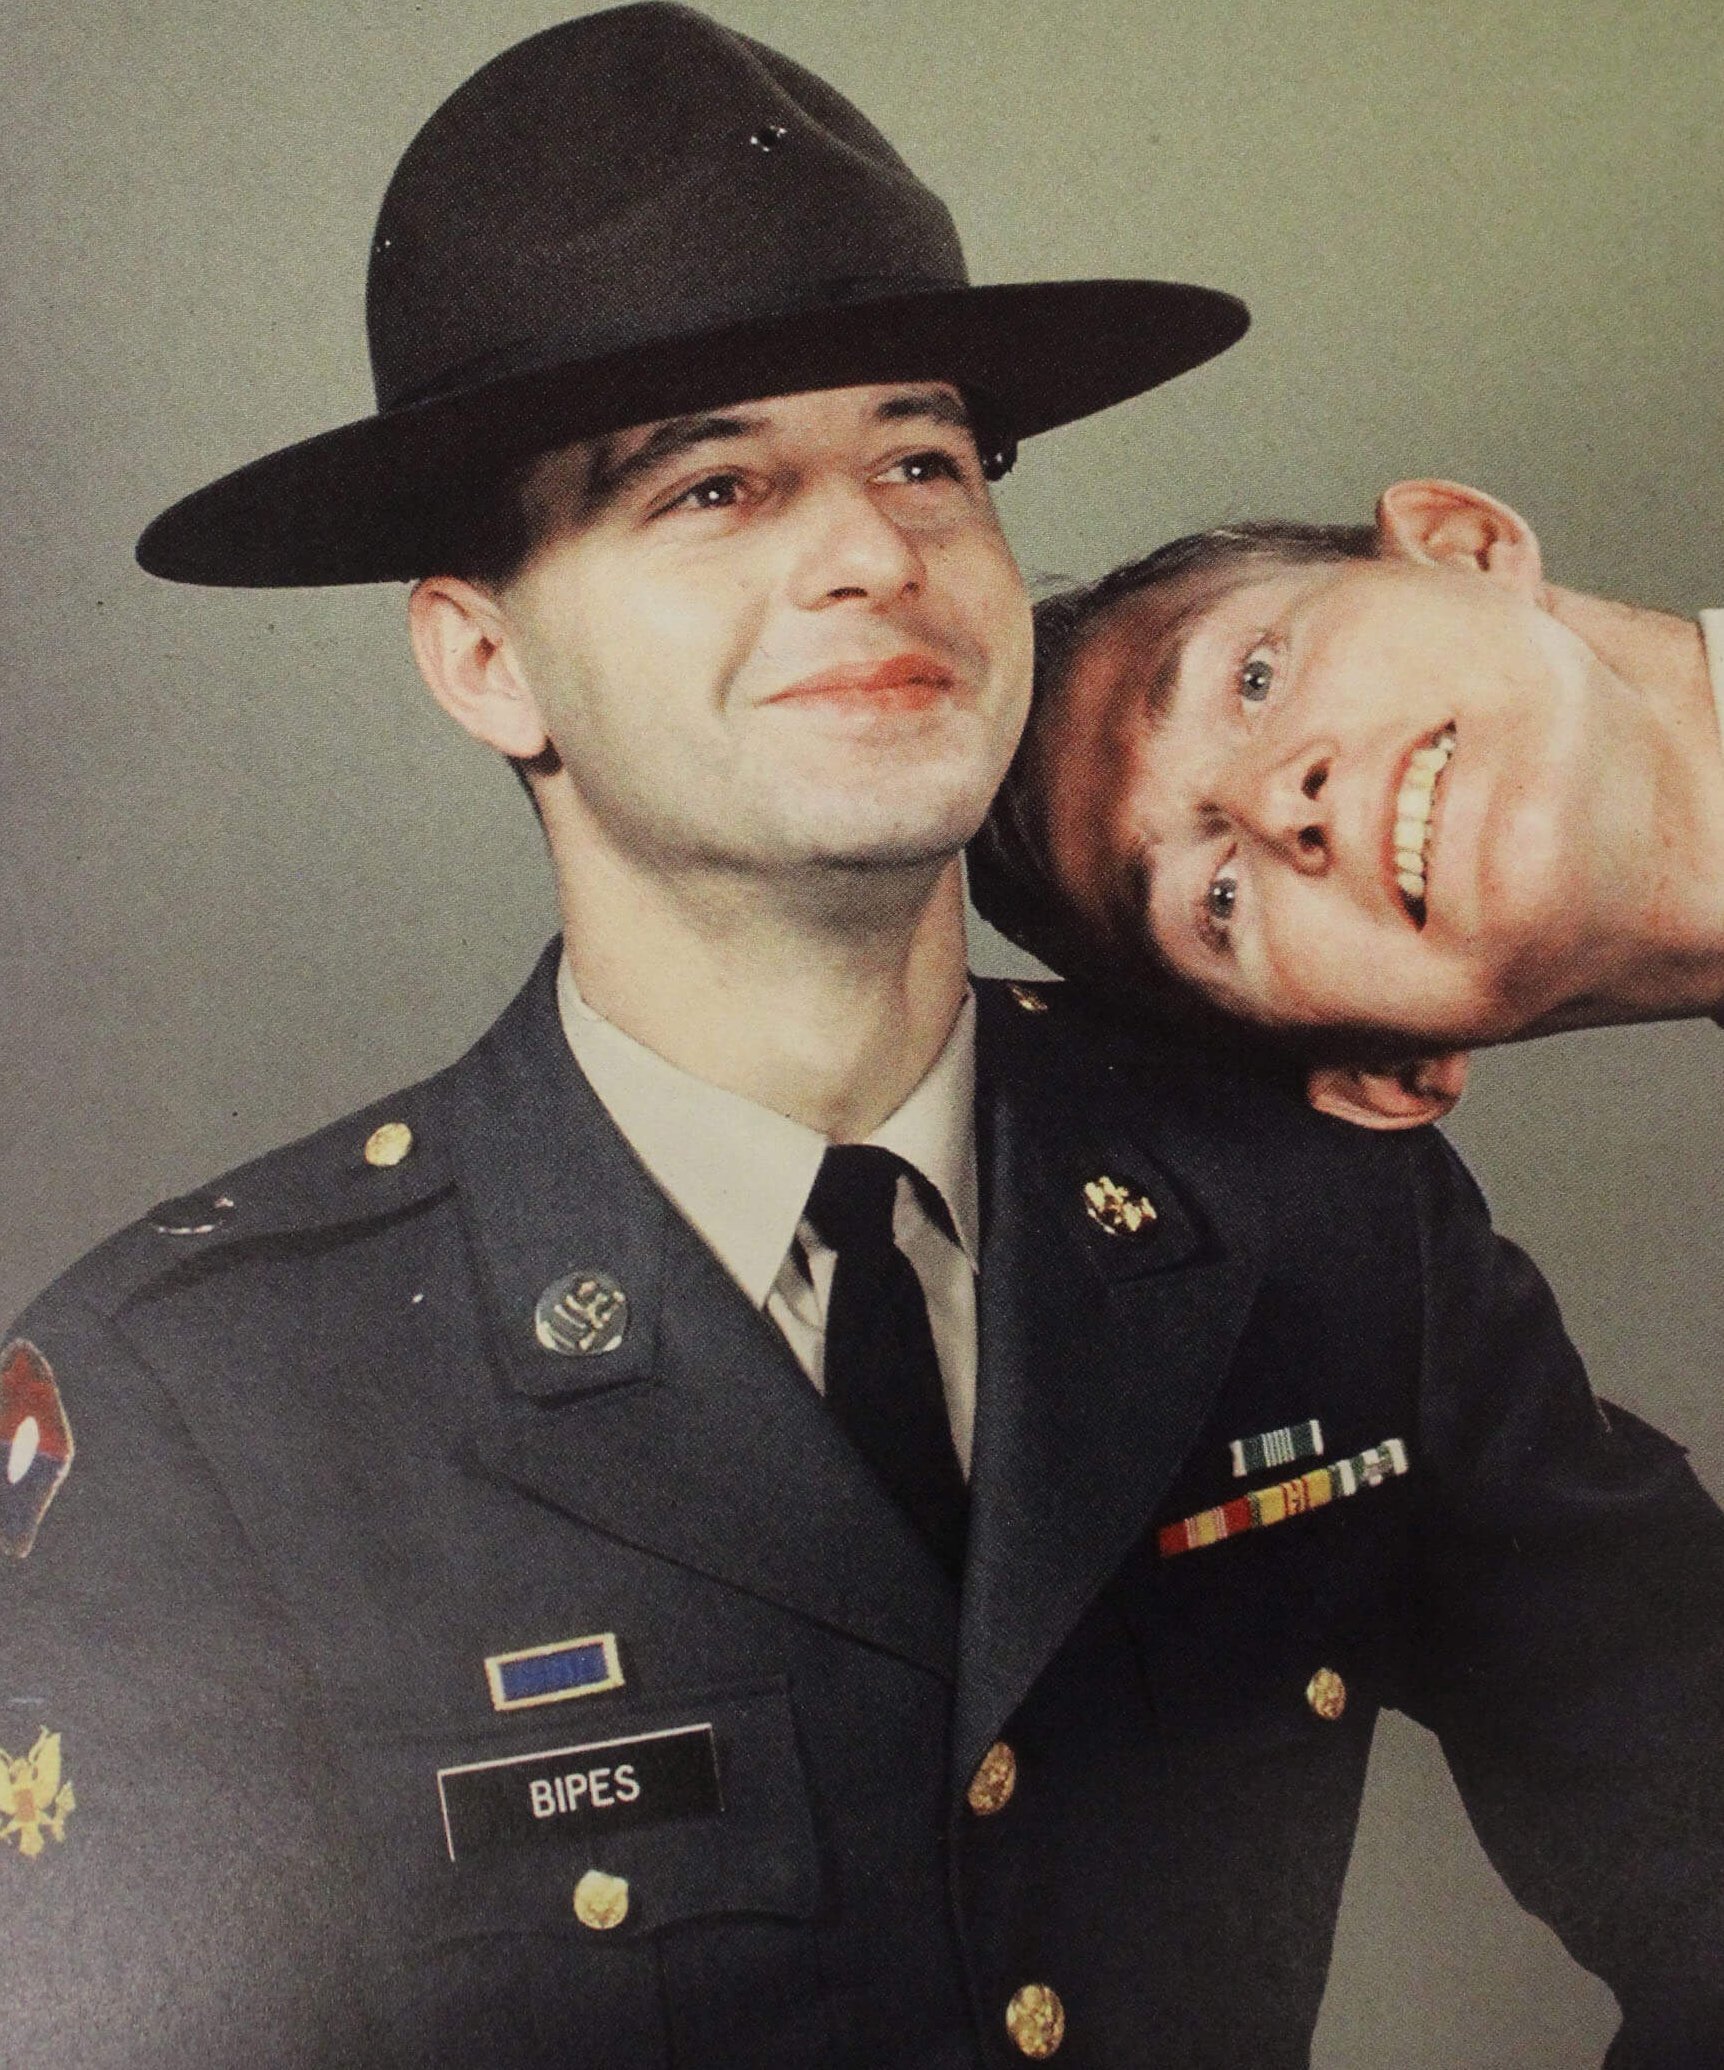 A portrait of a young soldier trying to keep a straight face while a second man leans into the frame with a grin.